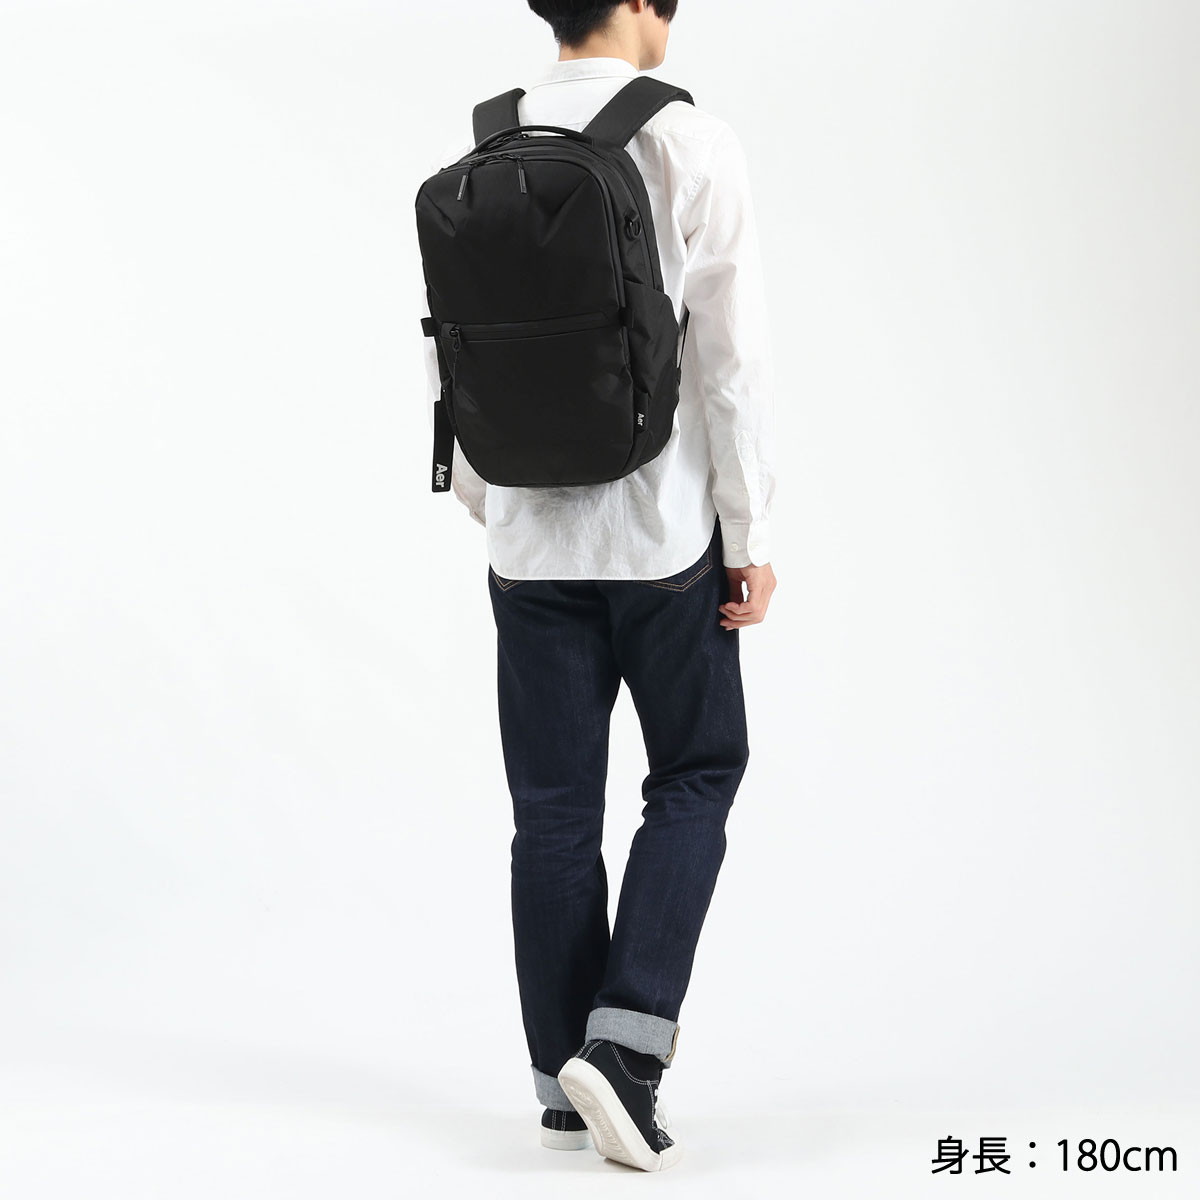 Aer エアー City Collection City Pack X-pac バックパック 14L ...